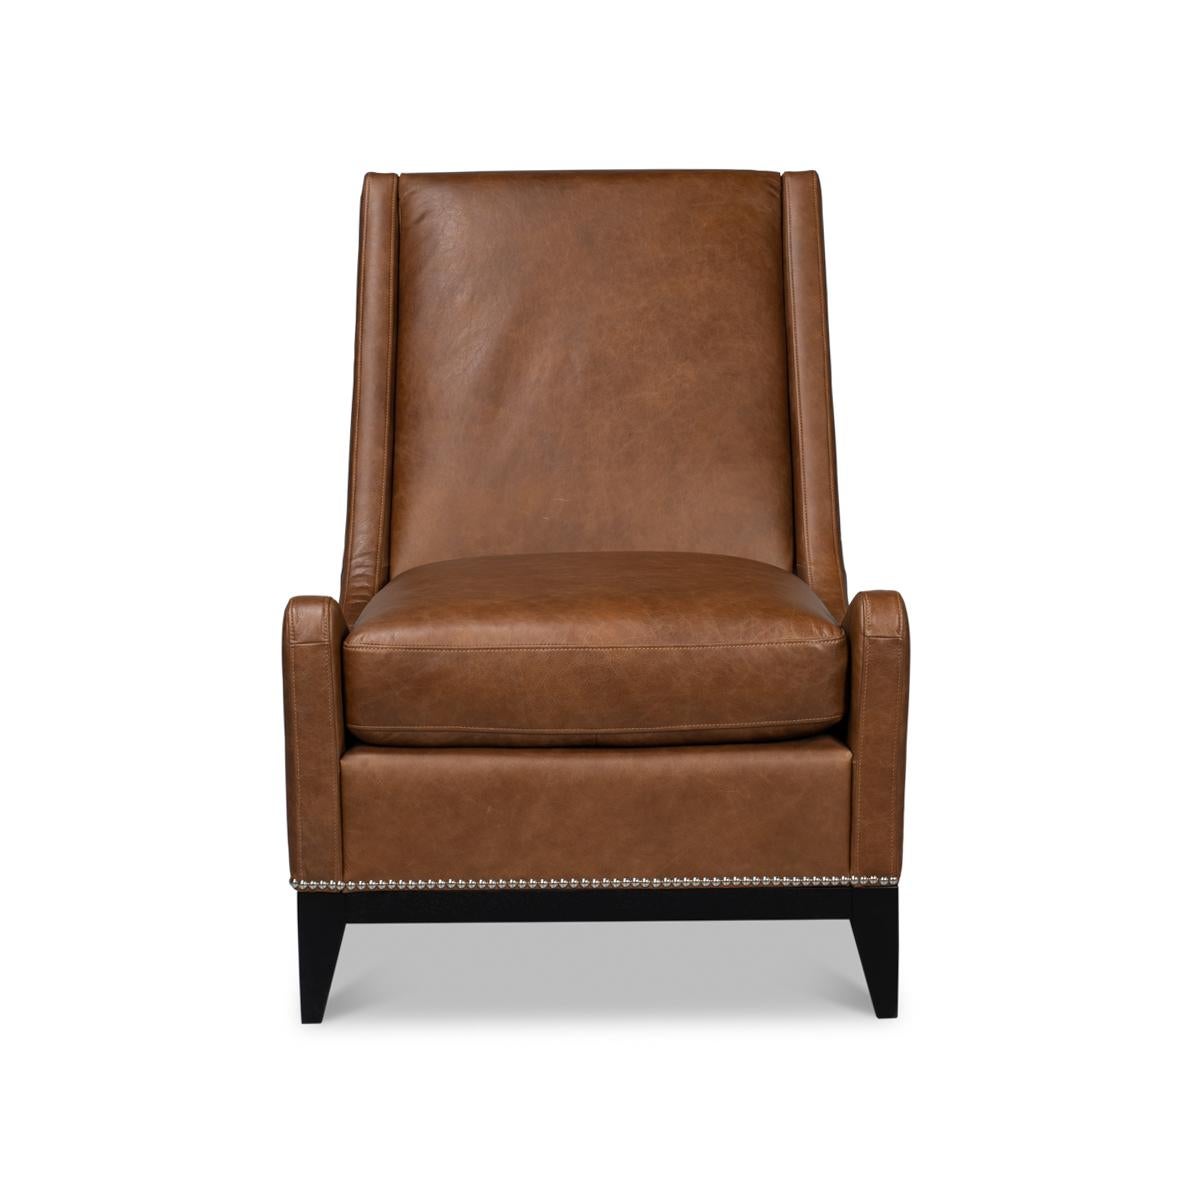 Crafted with meticulous attention to detail, this chair features a supple top-grain leather that beckons you to sit and unwind. The warm, rich chocolate brown hue of the leather is beautifully complemented by the classic nailhead trim, exuding a